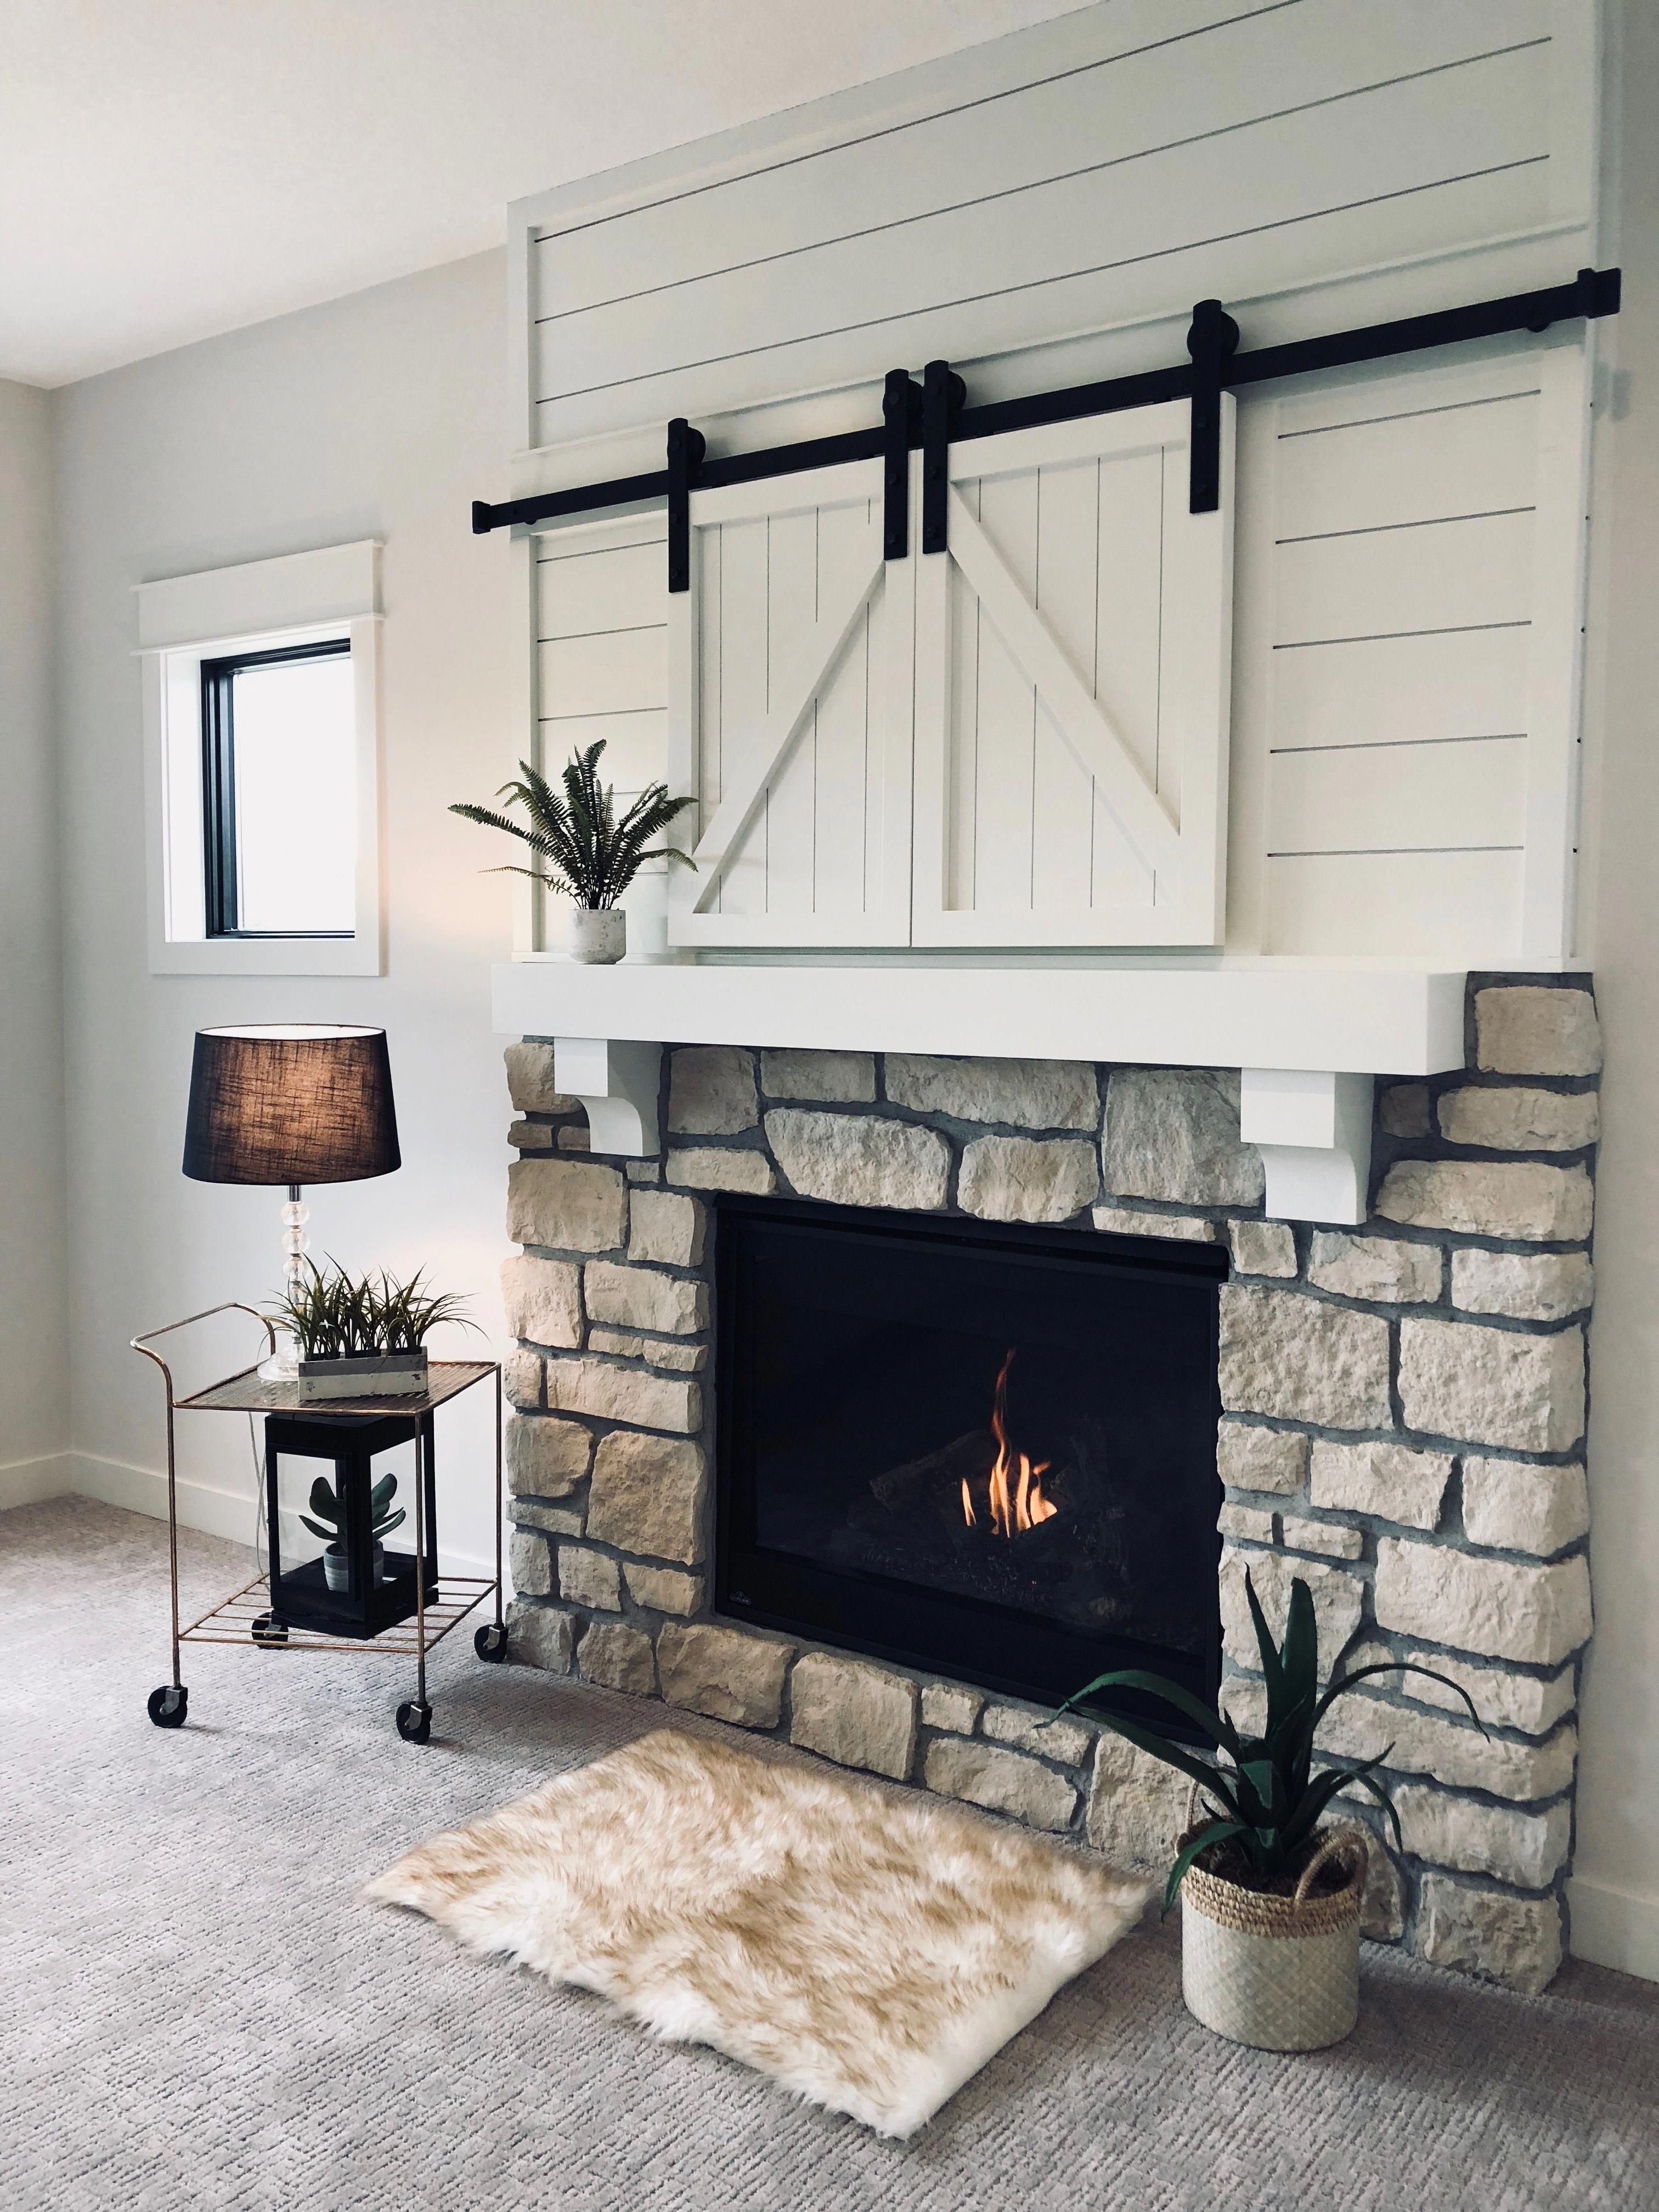 Fireplace with Storage Inspirational White Painted Shiplap On A Fireplace with Secret Tv Storage